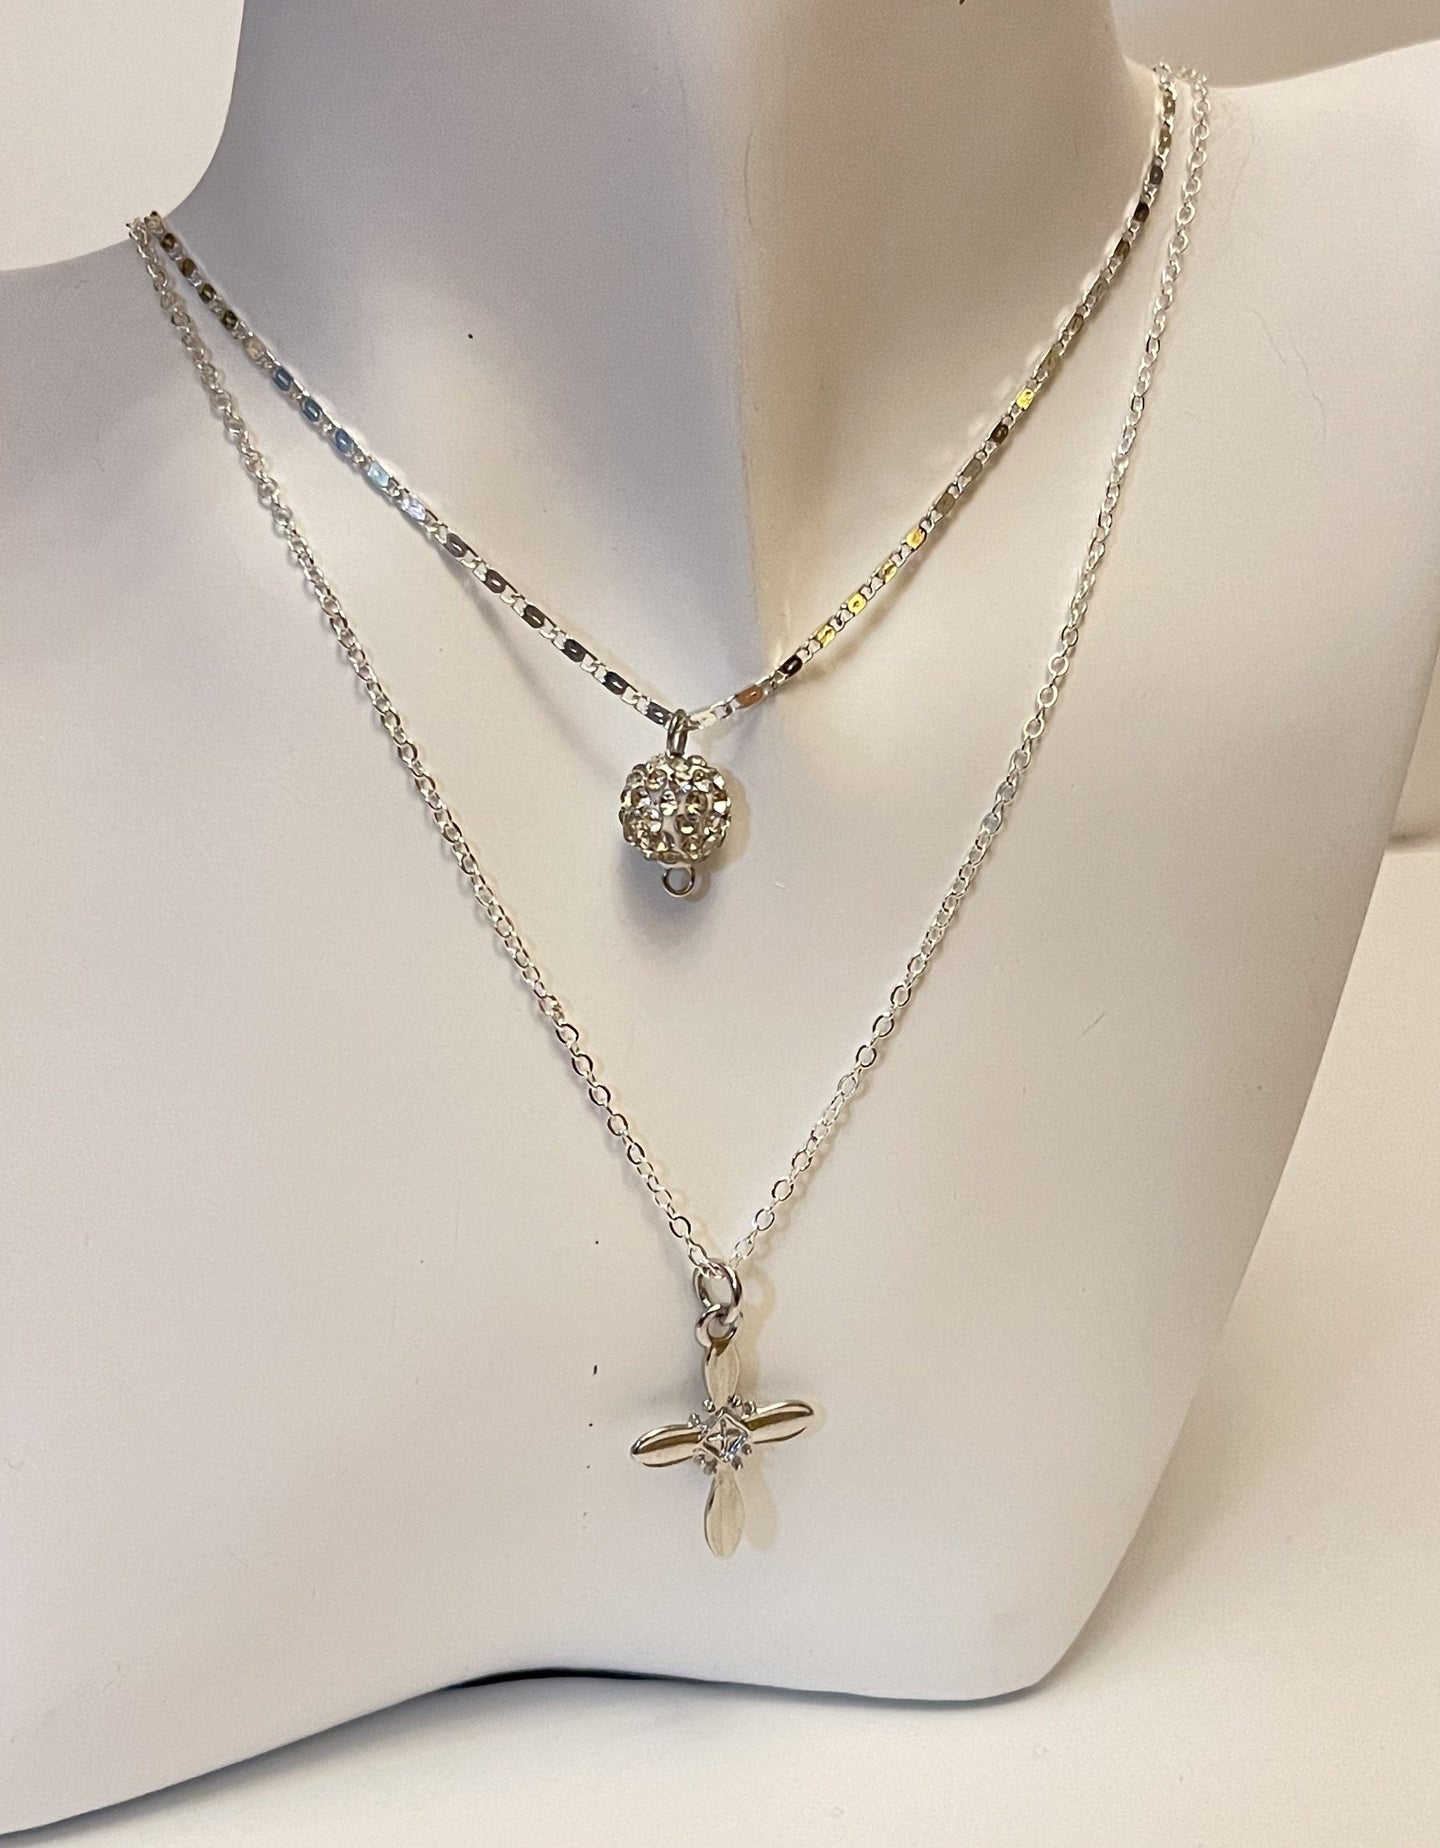 Necklace - Layered silver necklace with delicate chains - silver cross and rhinestone charms - 16